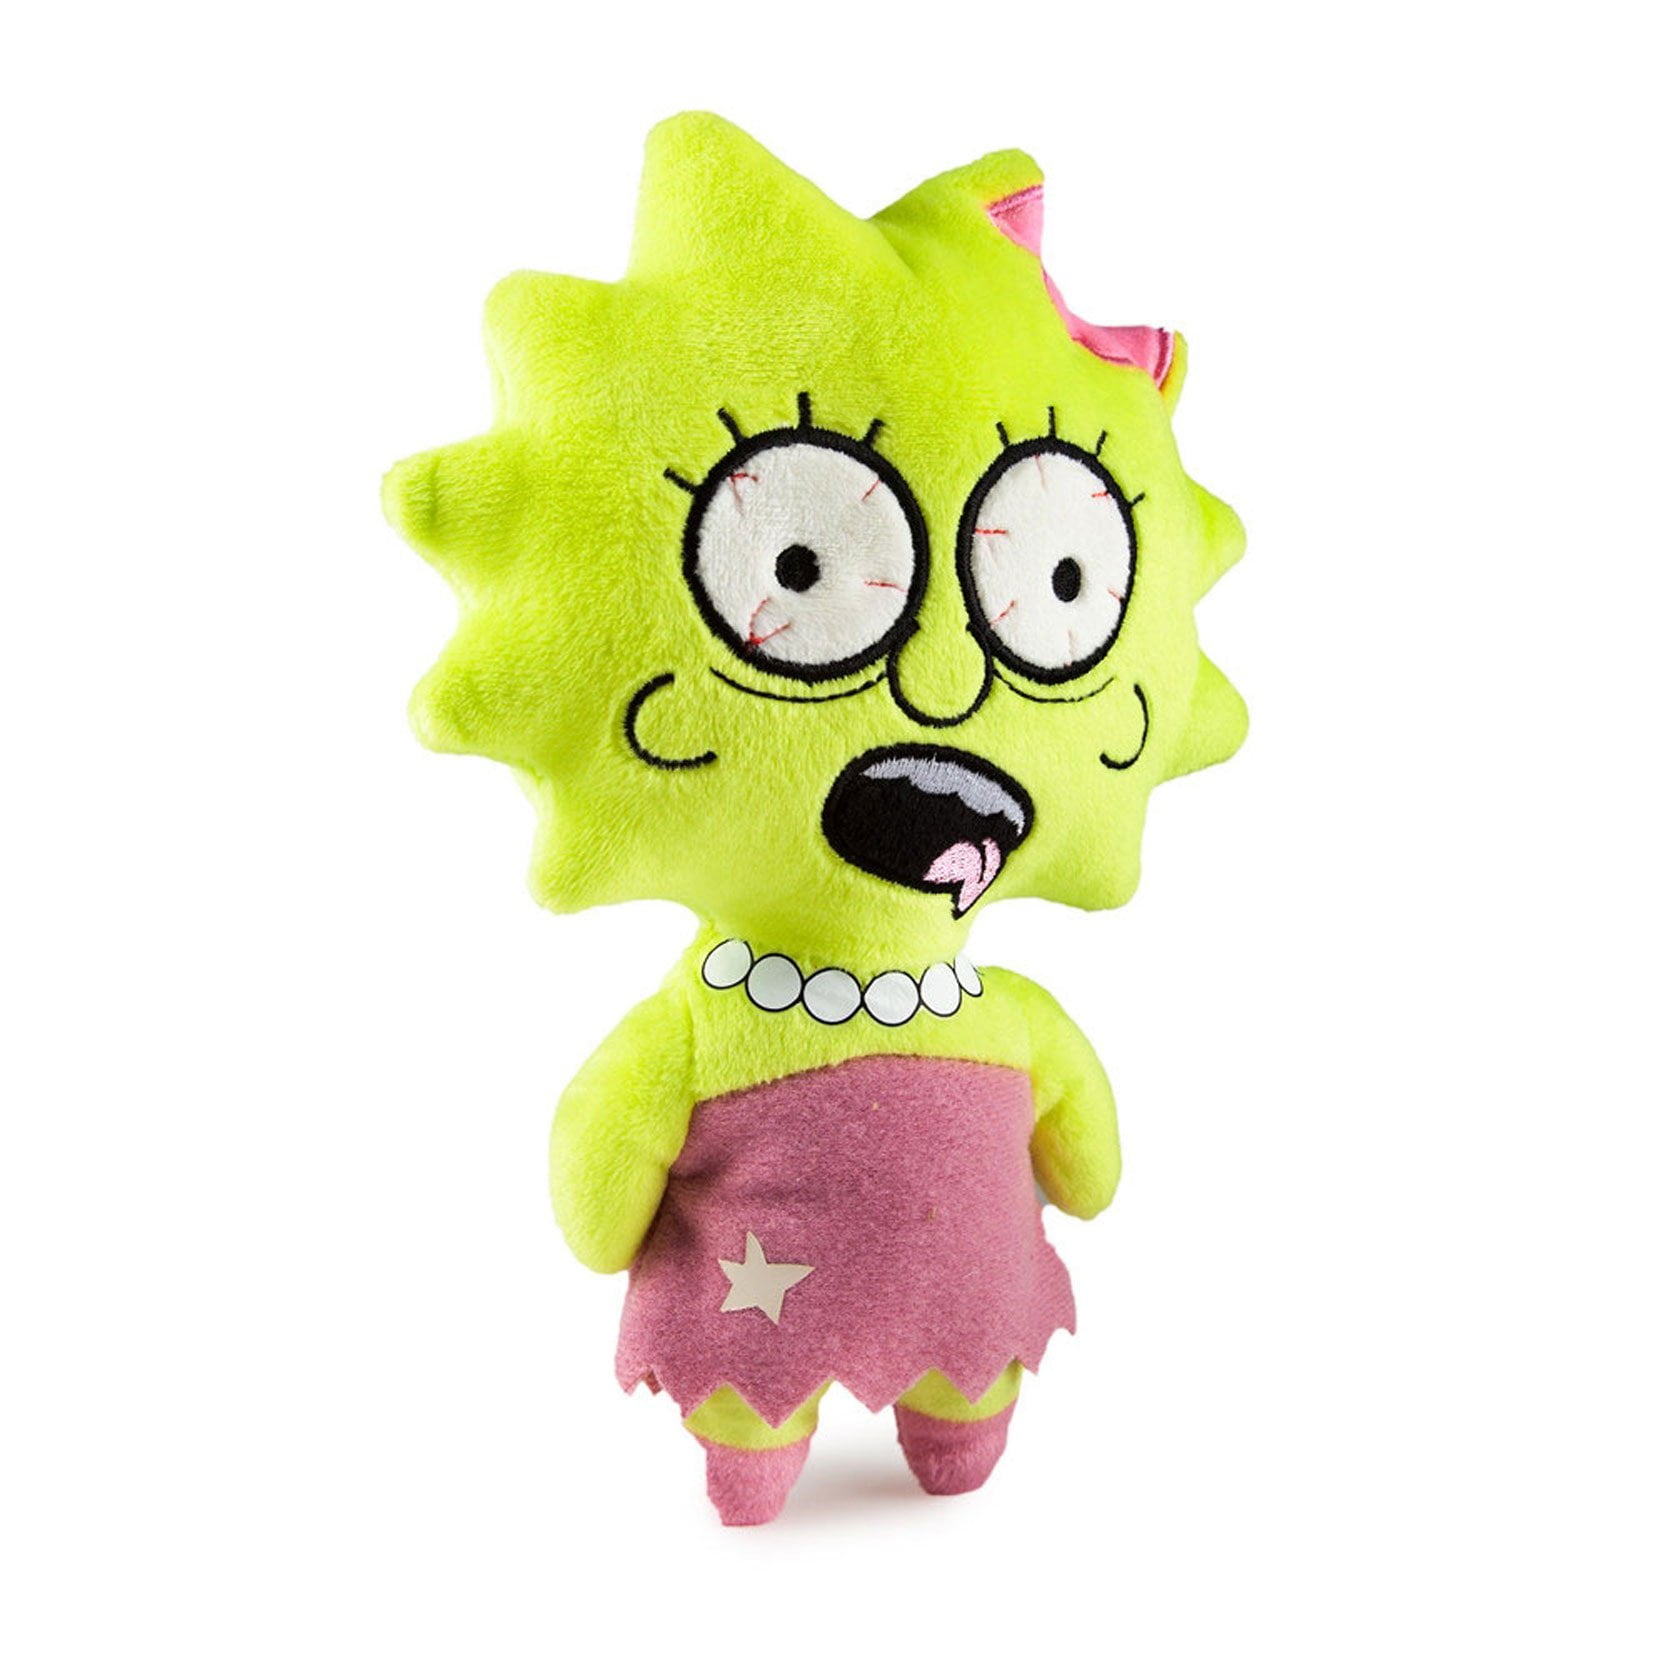 ZOMBIE MARGE The Simpsons Phunny Soft Plush 7" By Kidrobot Brand New